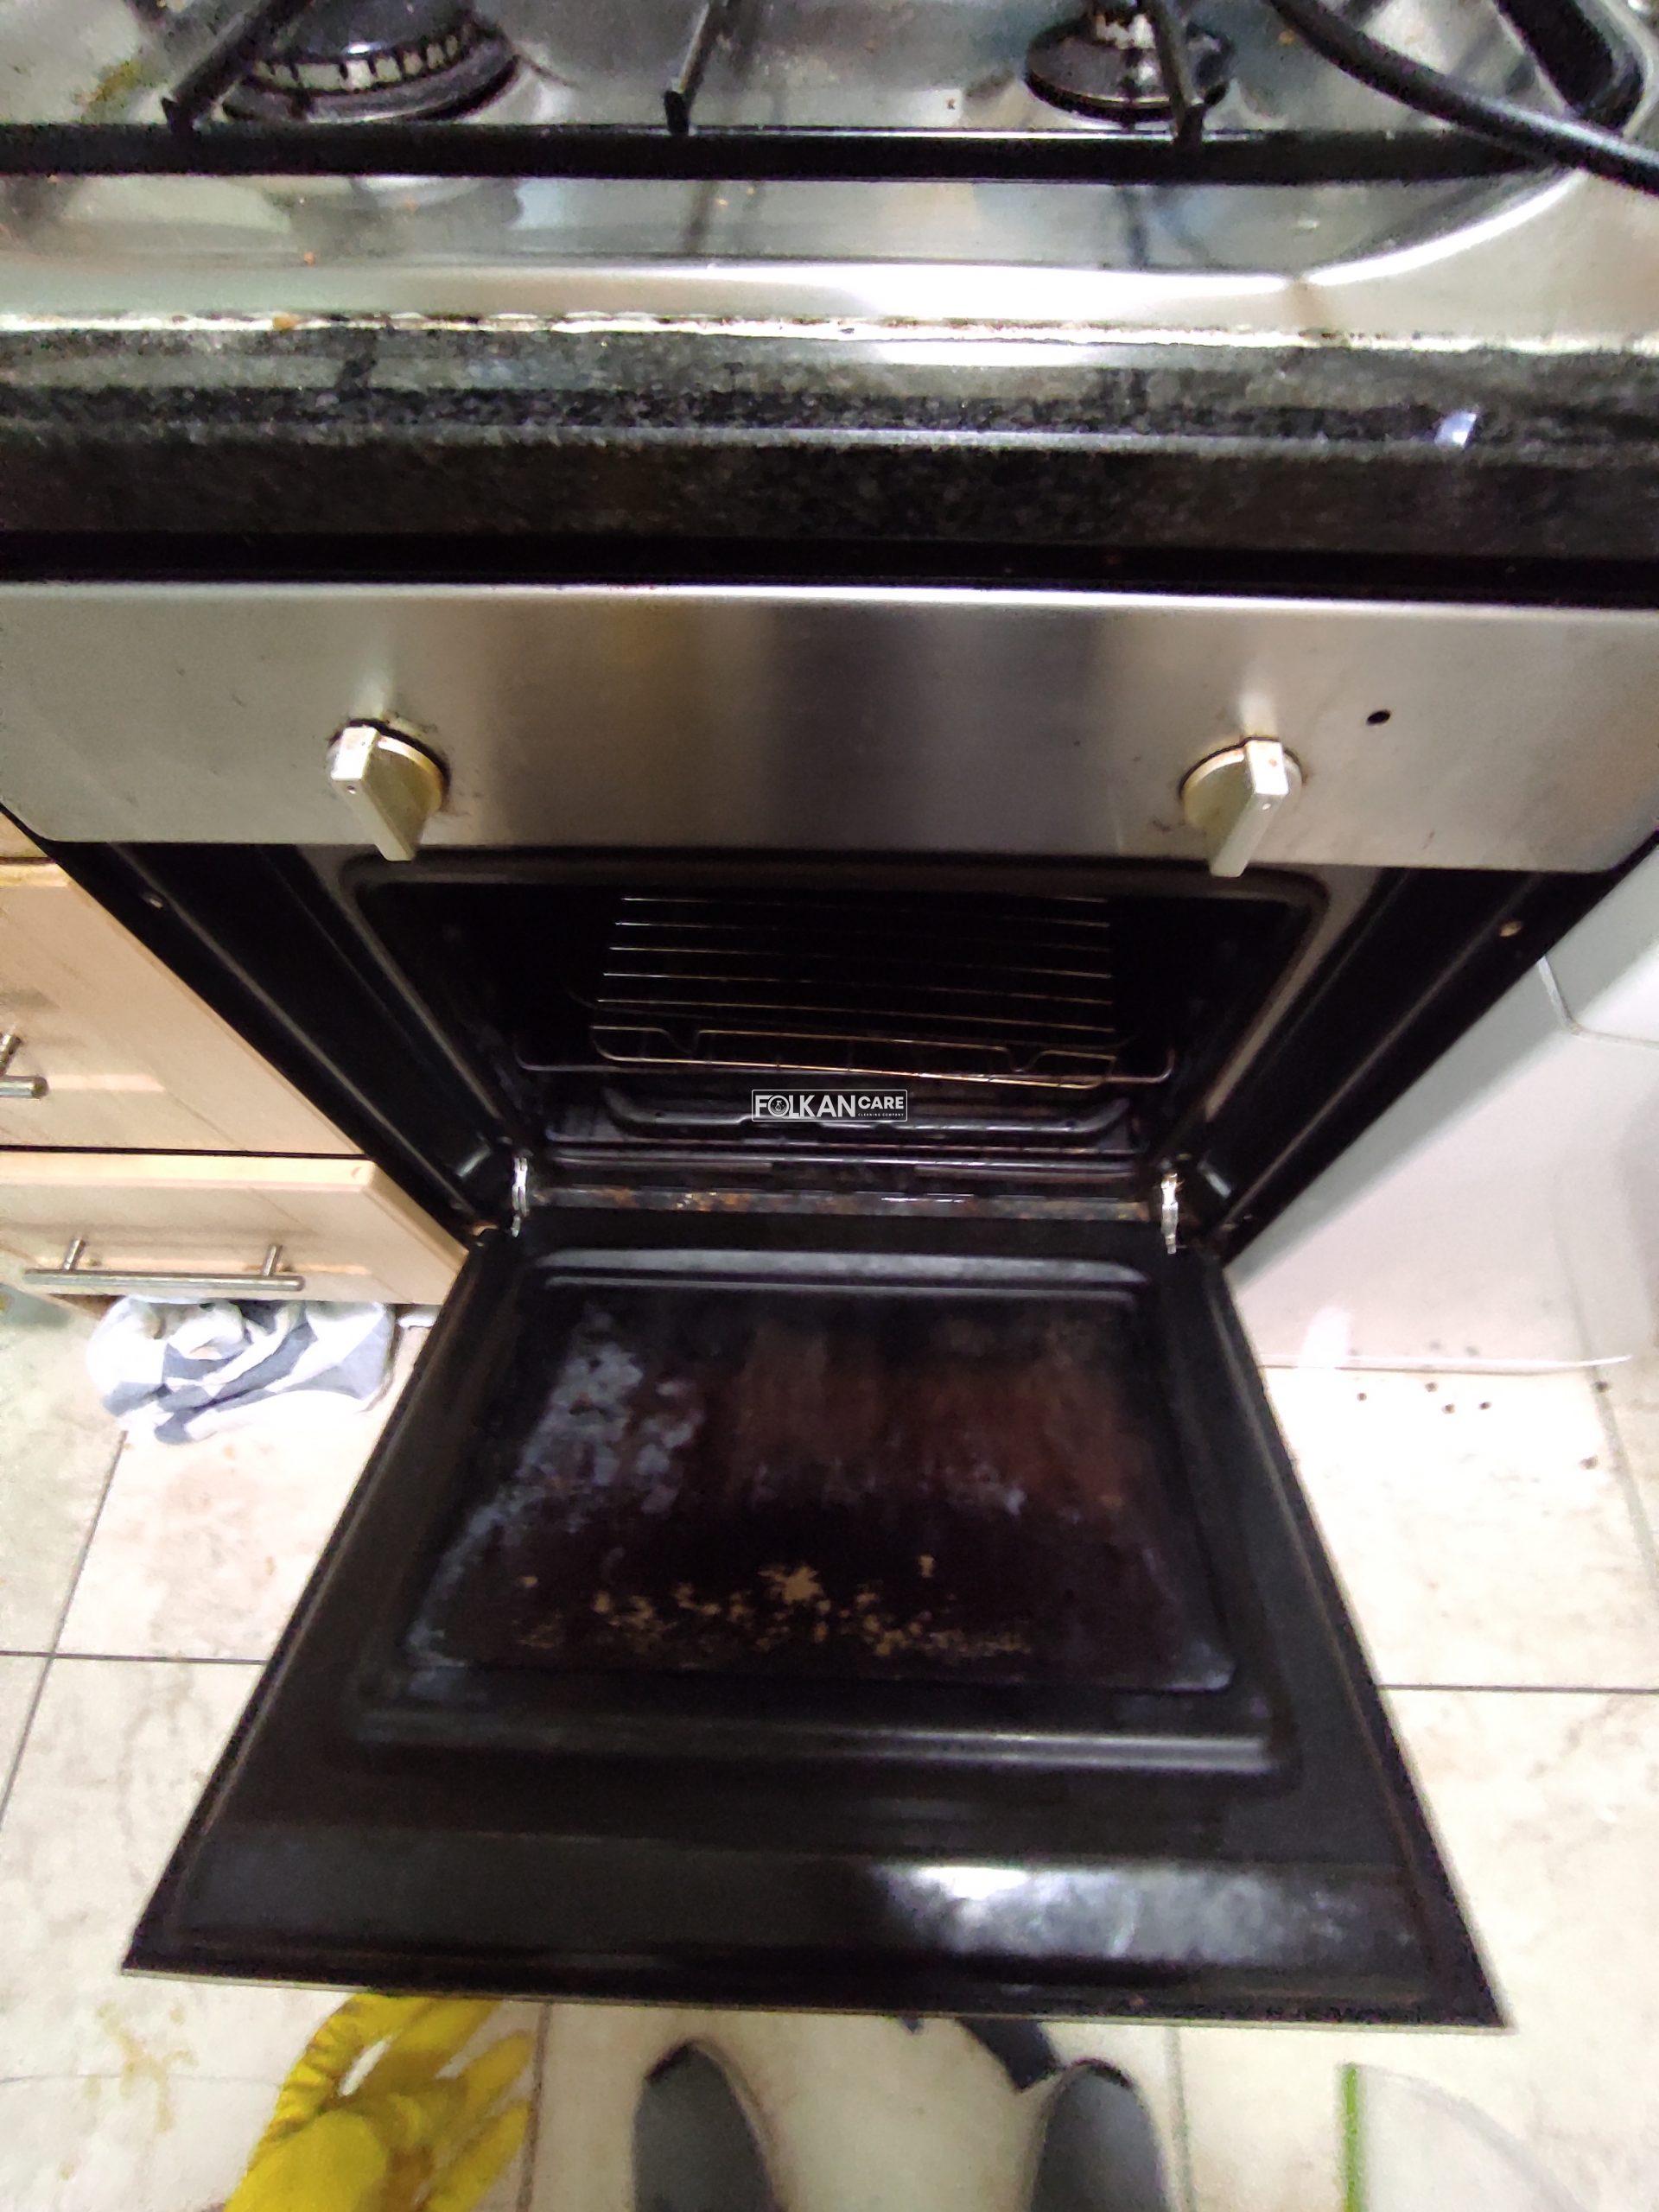 Cleaning Expert Shares: How To Clean The Oven Quickly Everyone Knows That Oven Cleaning Is A Messy And Hectic Job. However, It Is Important To Tackle That Mess Nevertheless. A Dirty Over Doesn’t Only Look Bad, But There Are Various Other Reasons As Well To Keep It Clean.